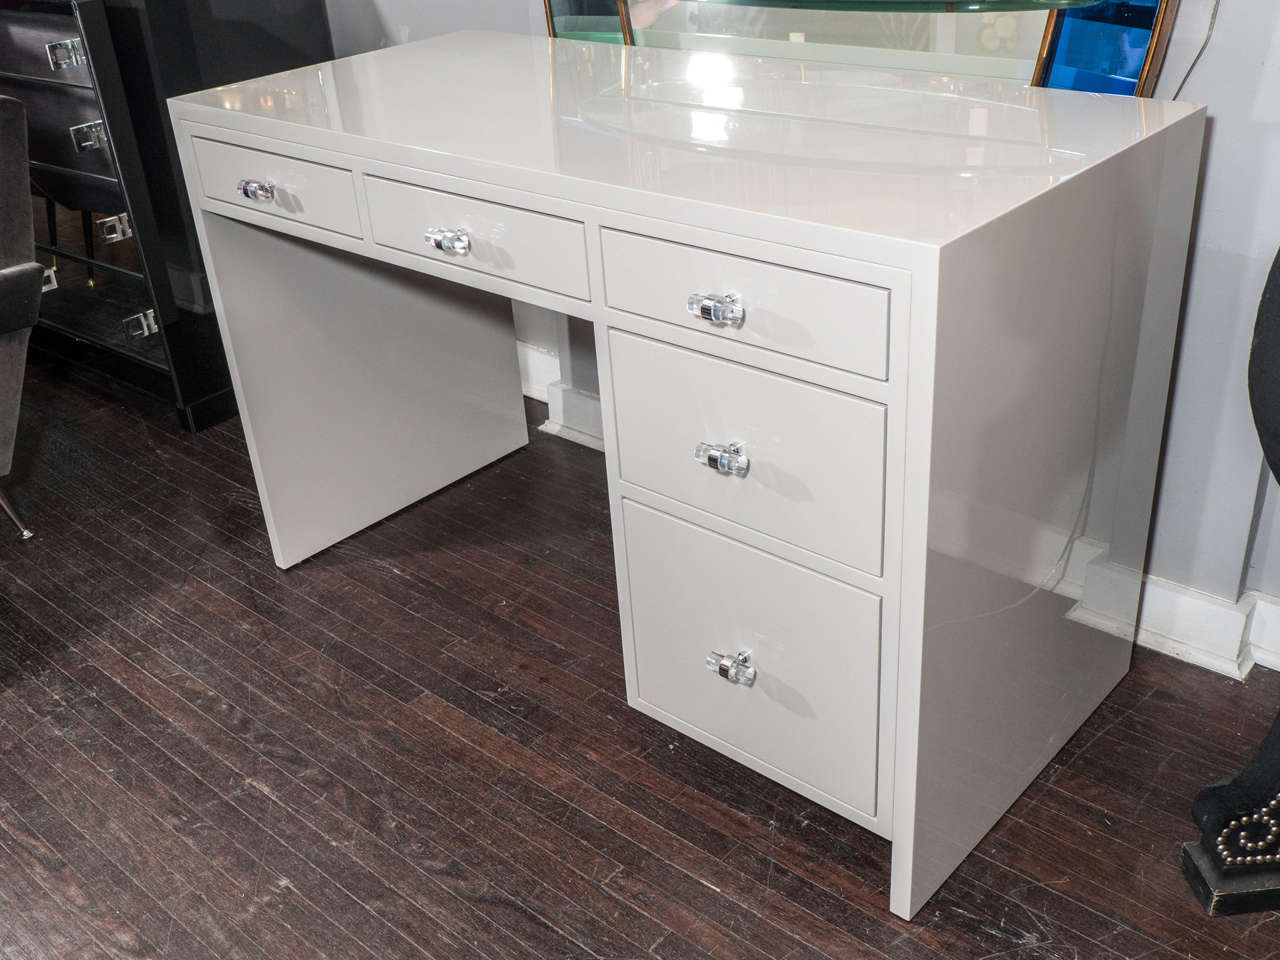 Custom 5-drawer lacquered desk with polished chrome & lucite knobs. The color of the desk shown in the photos is Benjamin Moore - Cumulus Cloud 1550. Customization is available in different sizes, colors, finishes and hardware/COM.